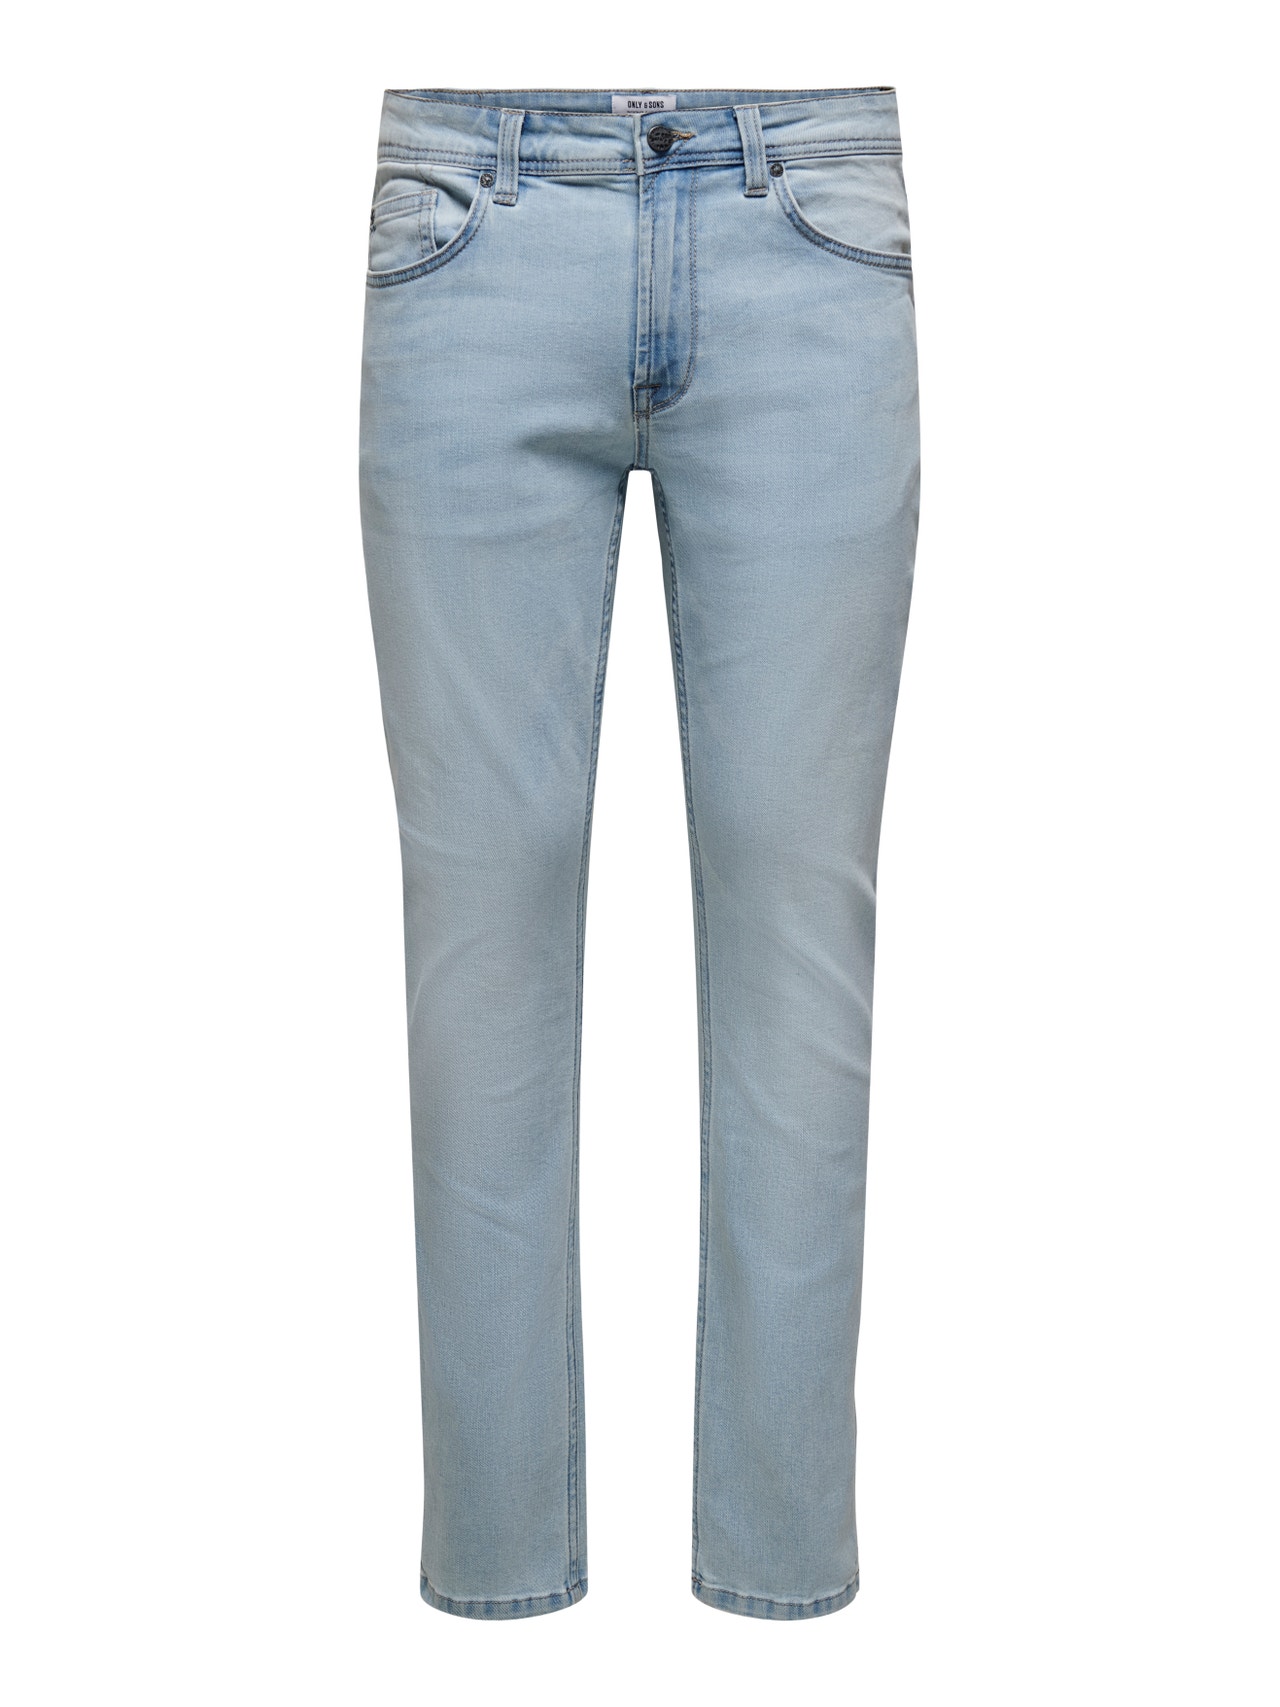 ONLY & SONS Jeans Regular Fit Taille moyenne -Blue Denim - 22021888